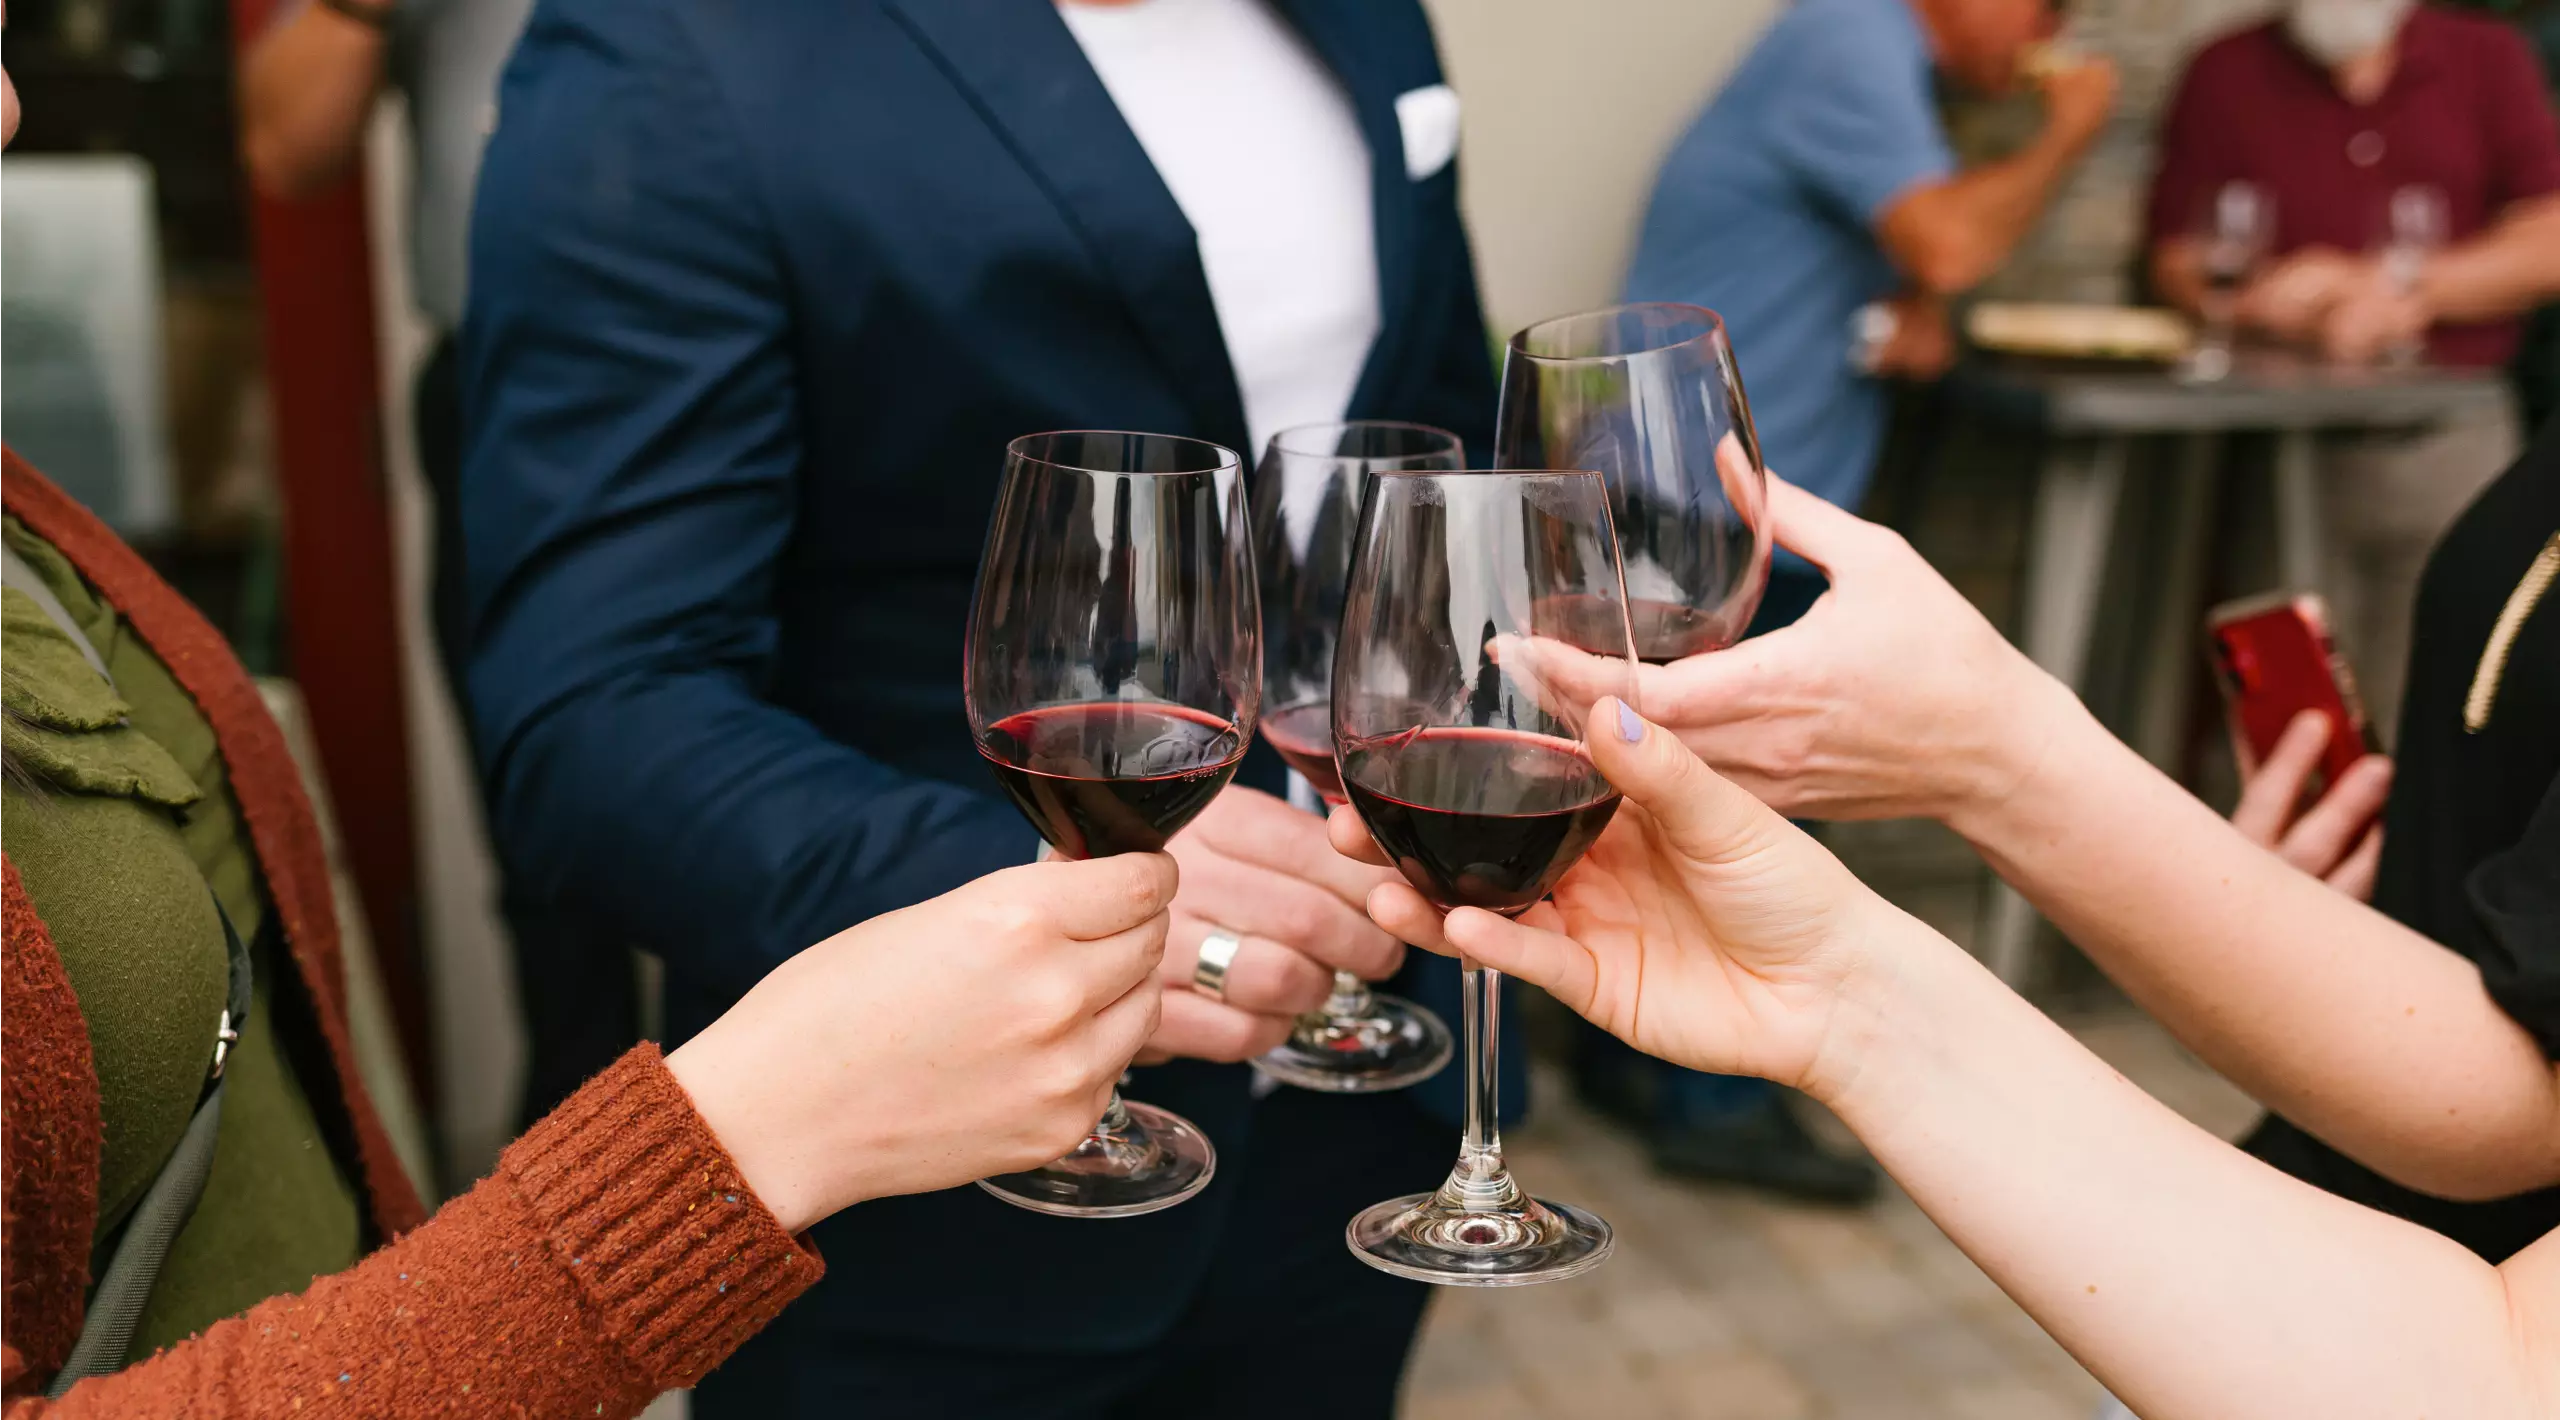 Hands holding up wine glasses full of red wine in a toast